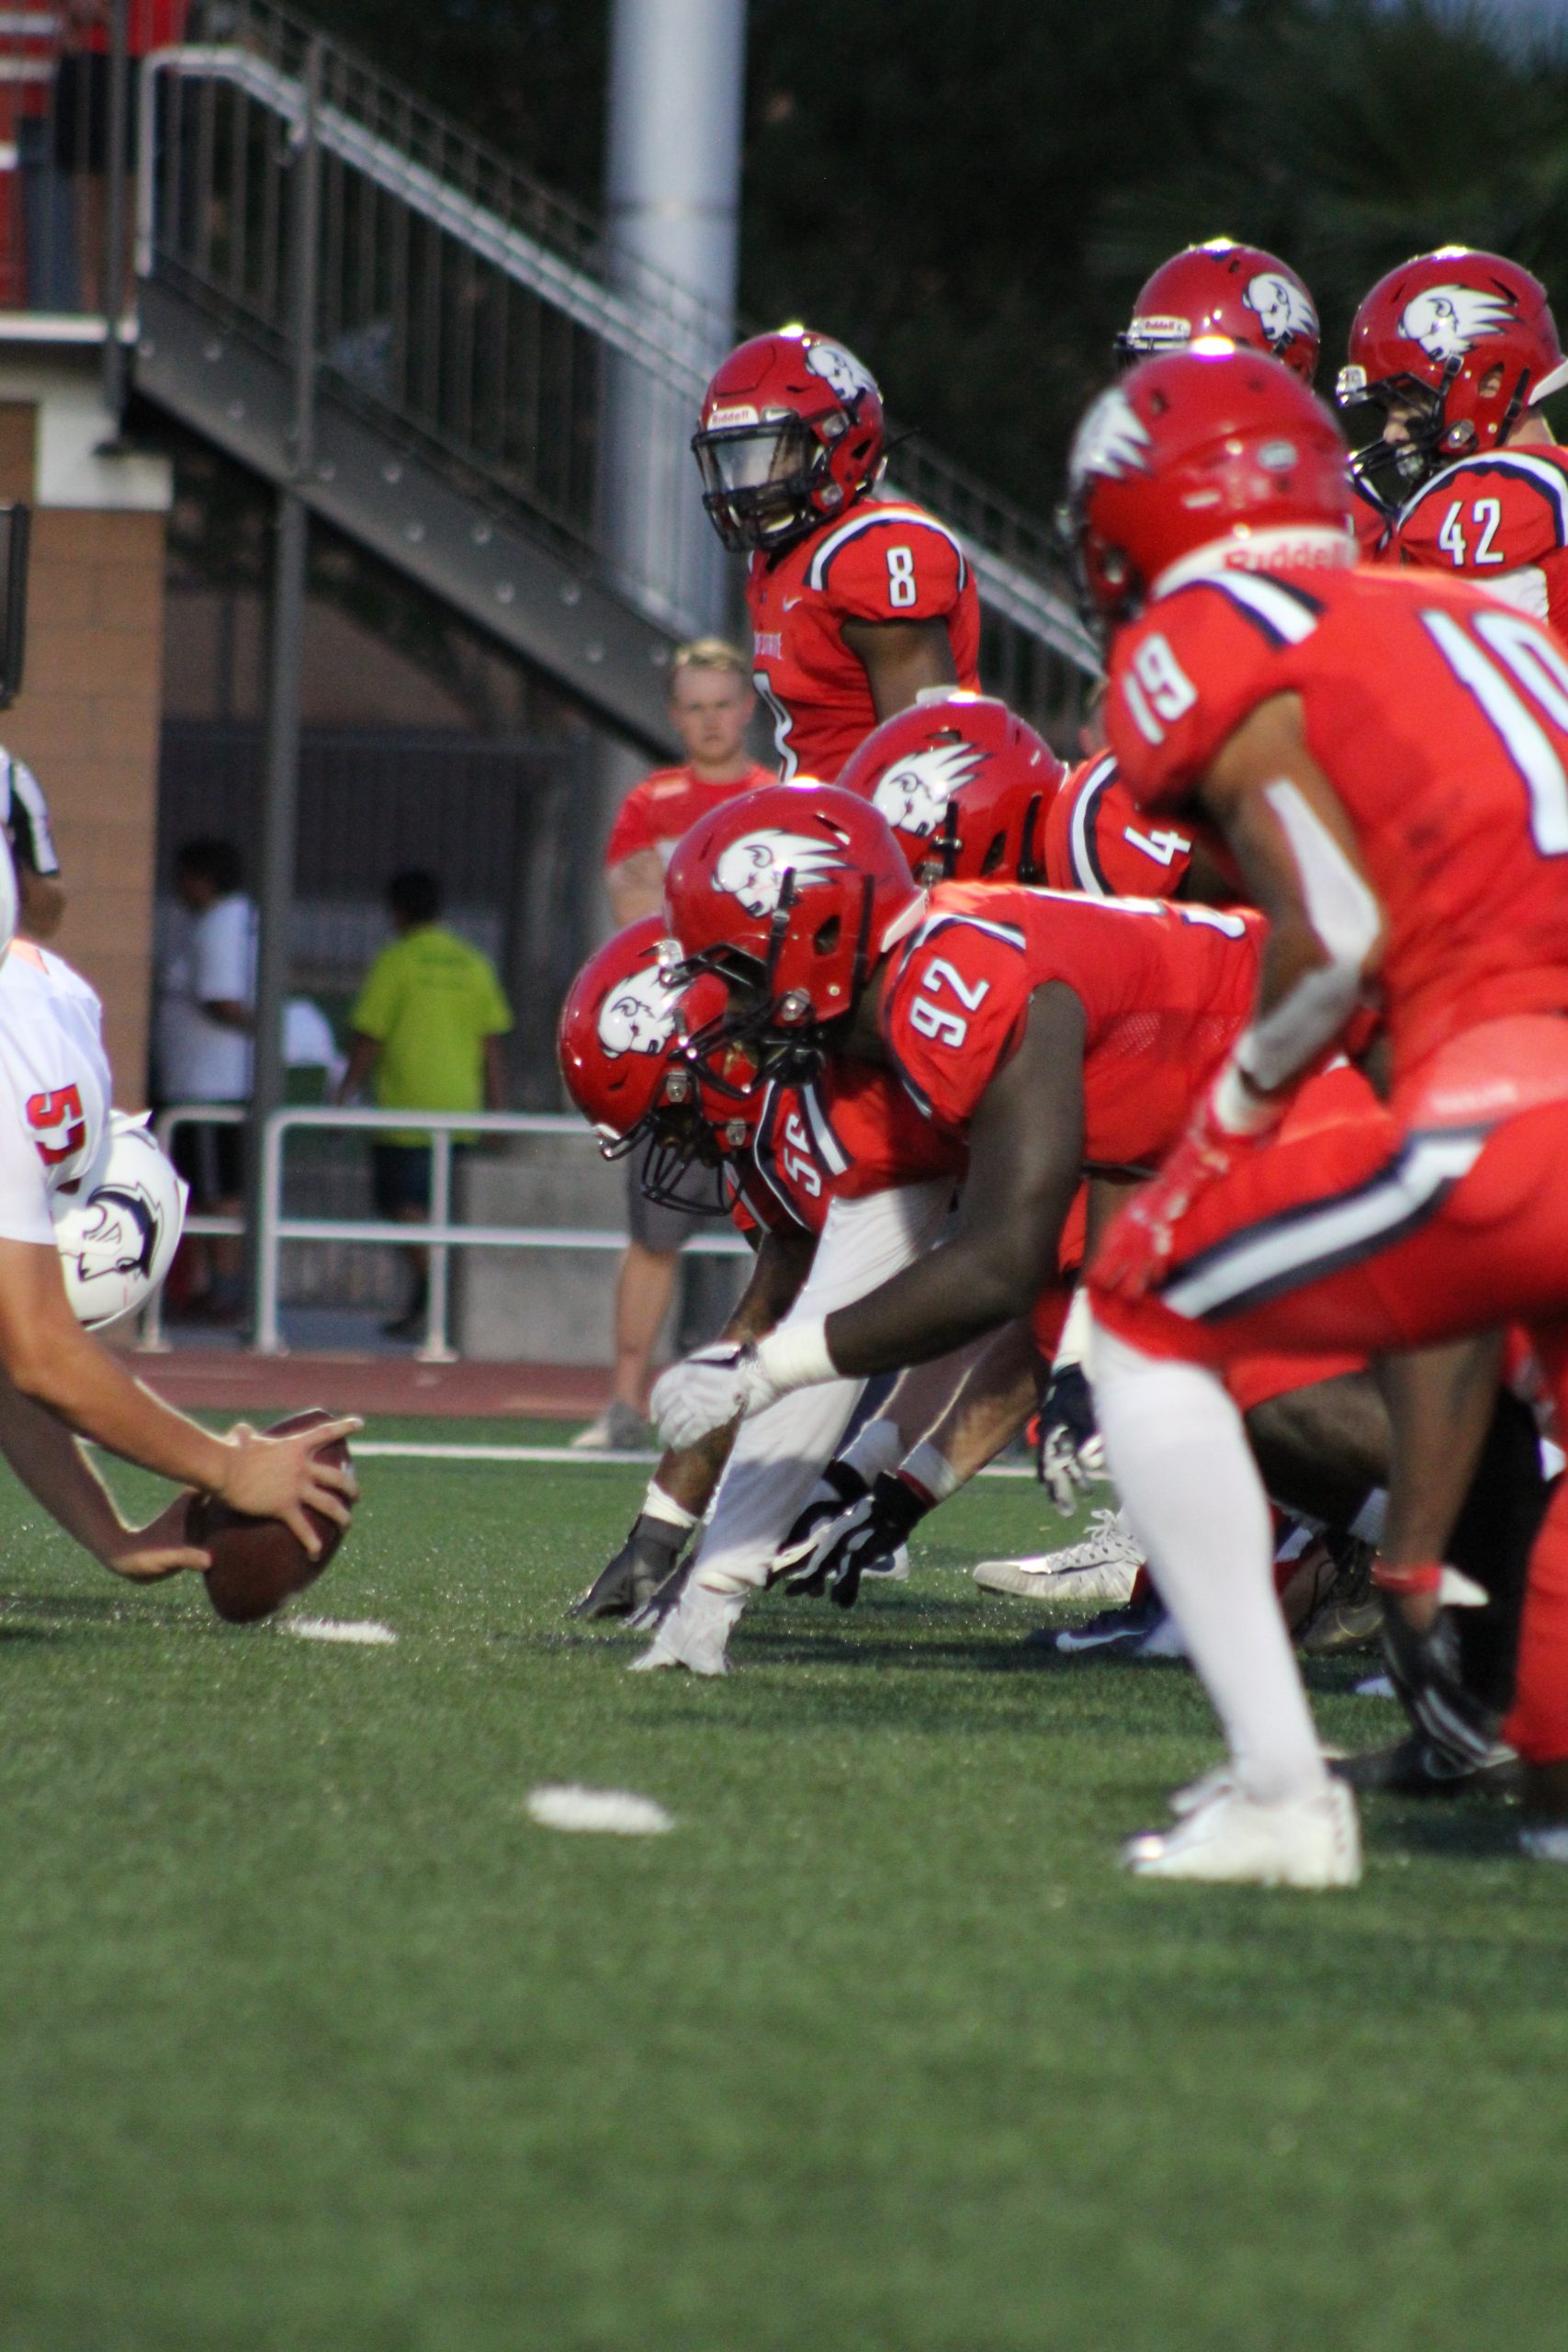 DSU football continues recruiting for DI play